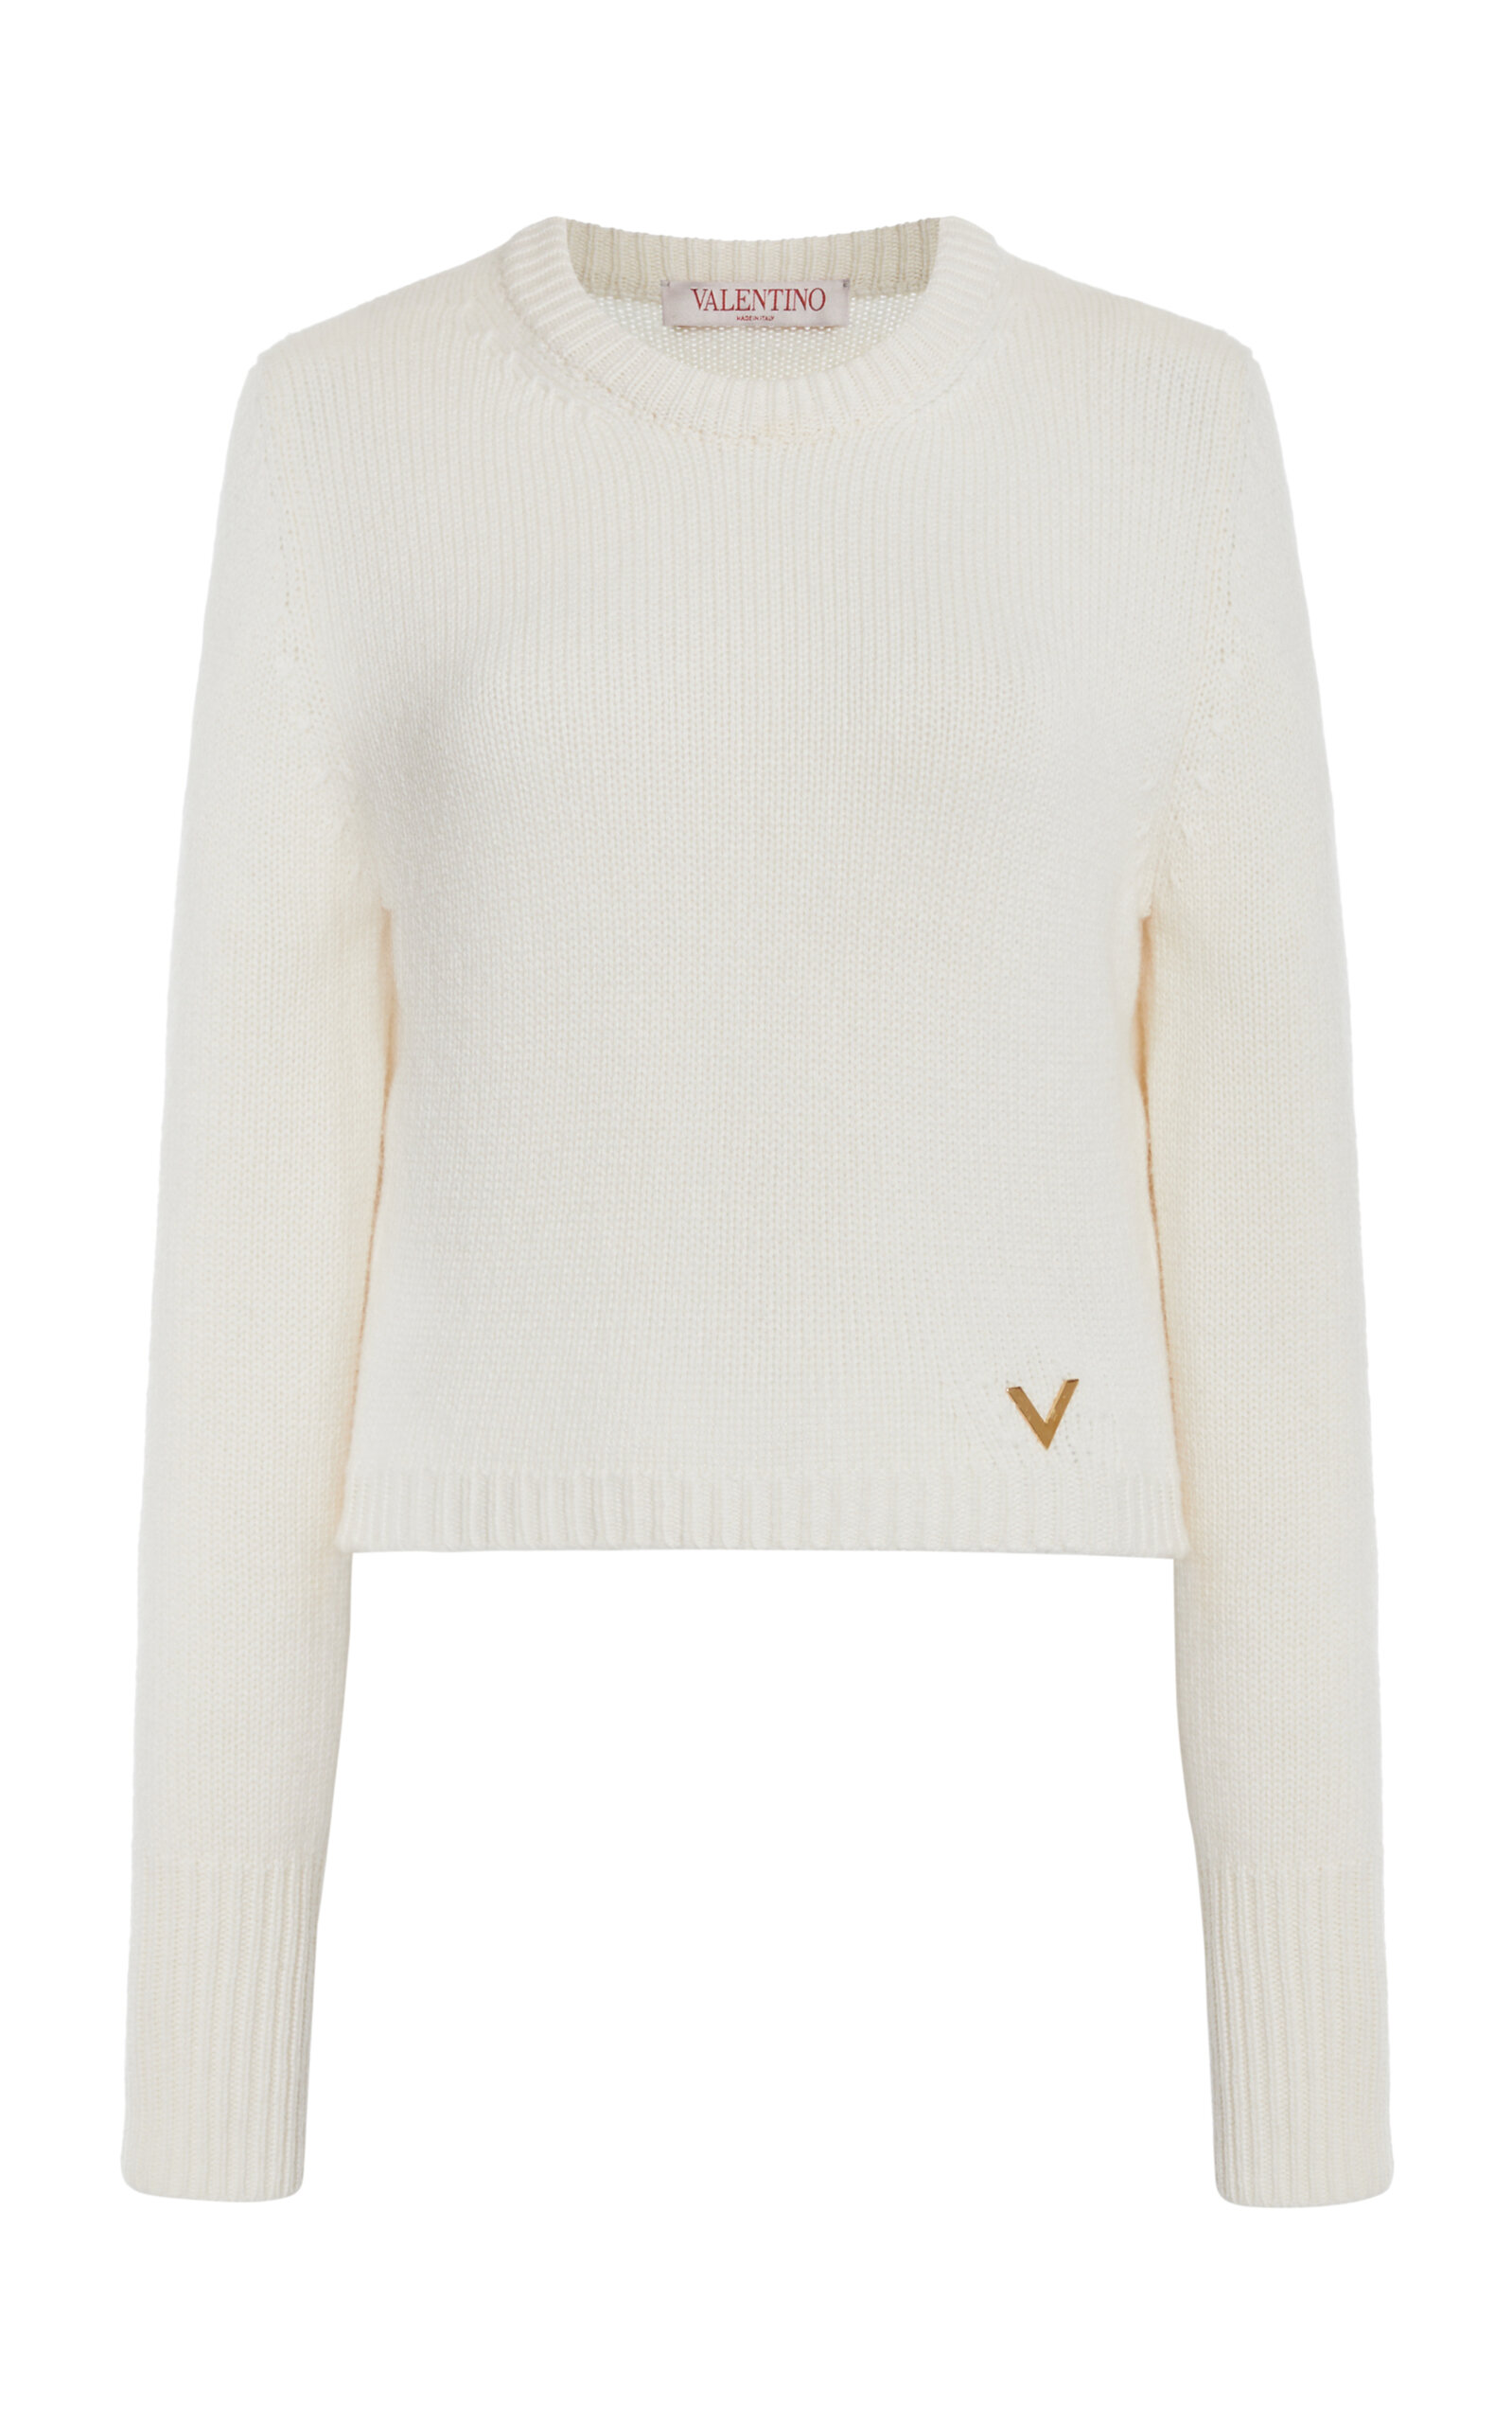 Valentino Cropped Cashmere Knit Top In White